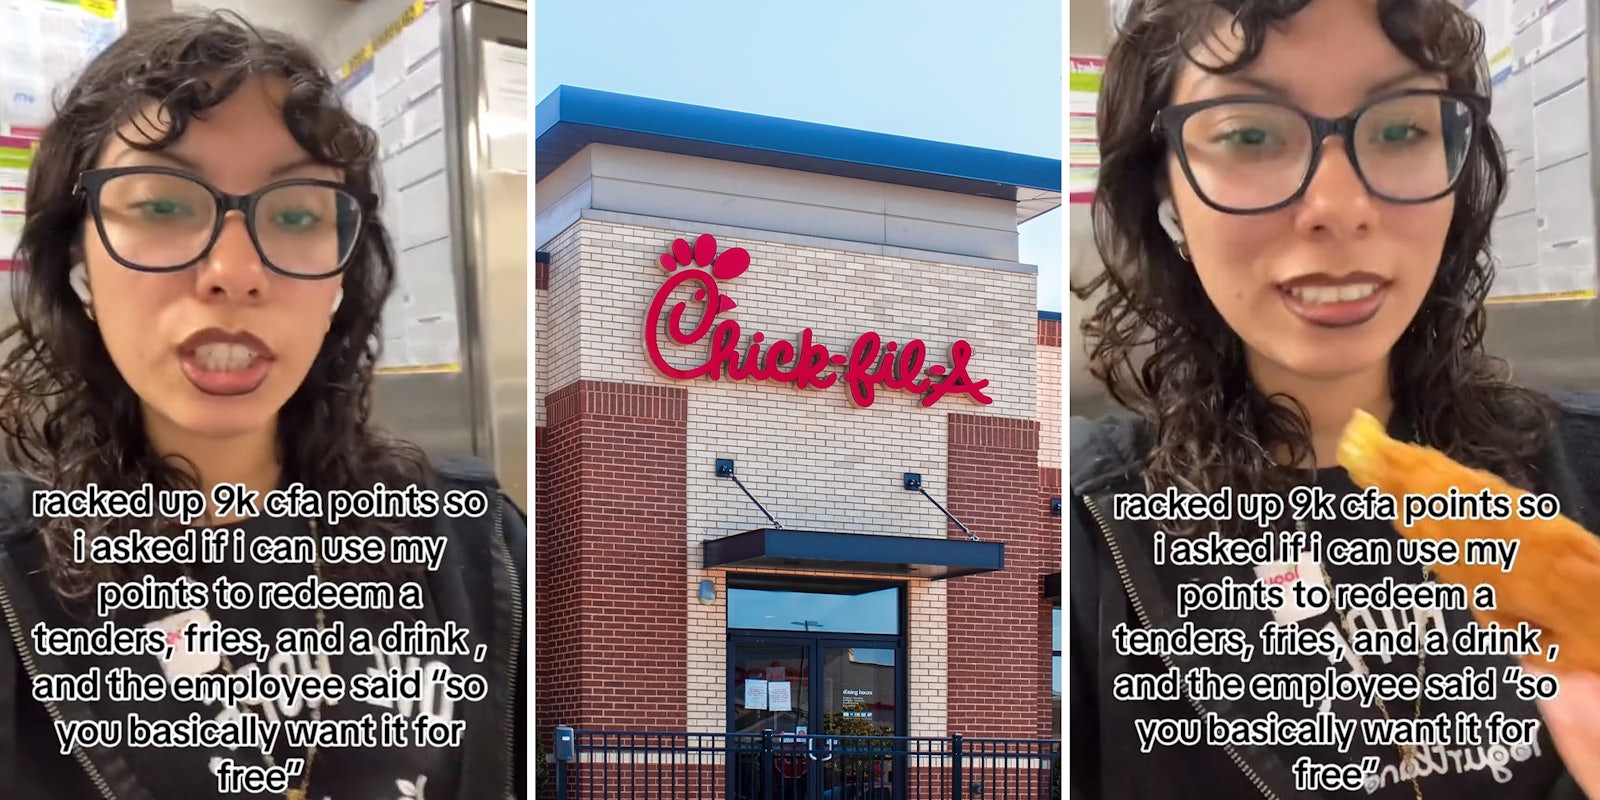 Chick-fil-A customer says worker shamed her for using points to get free meal